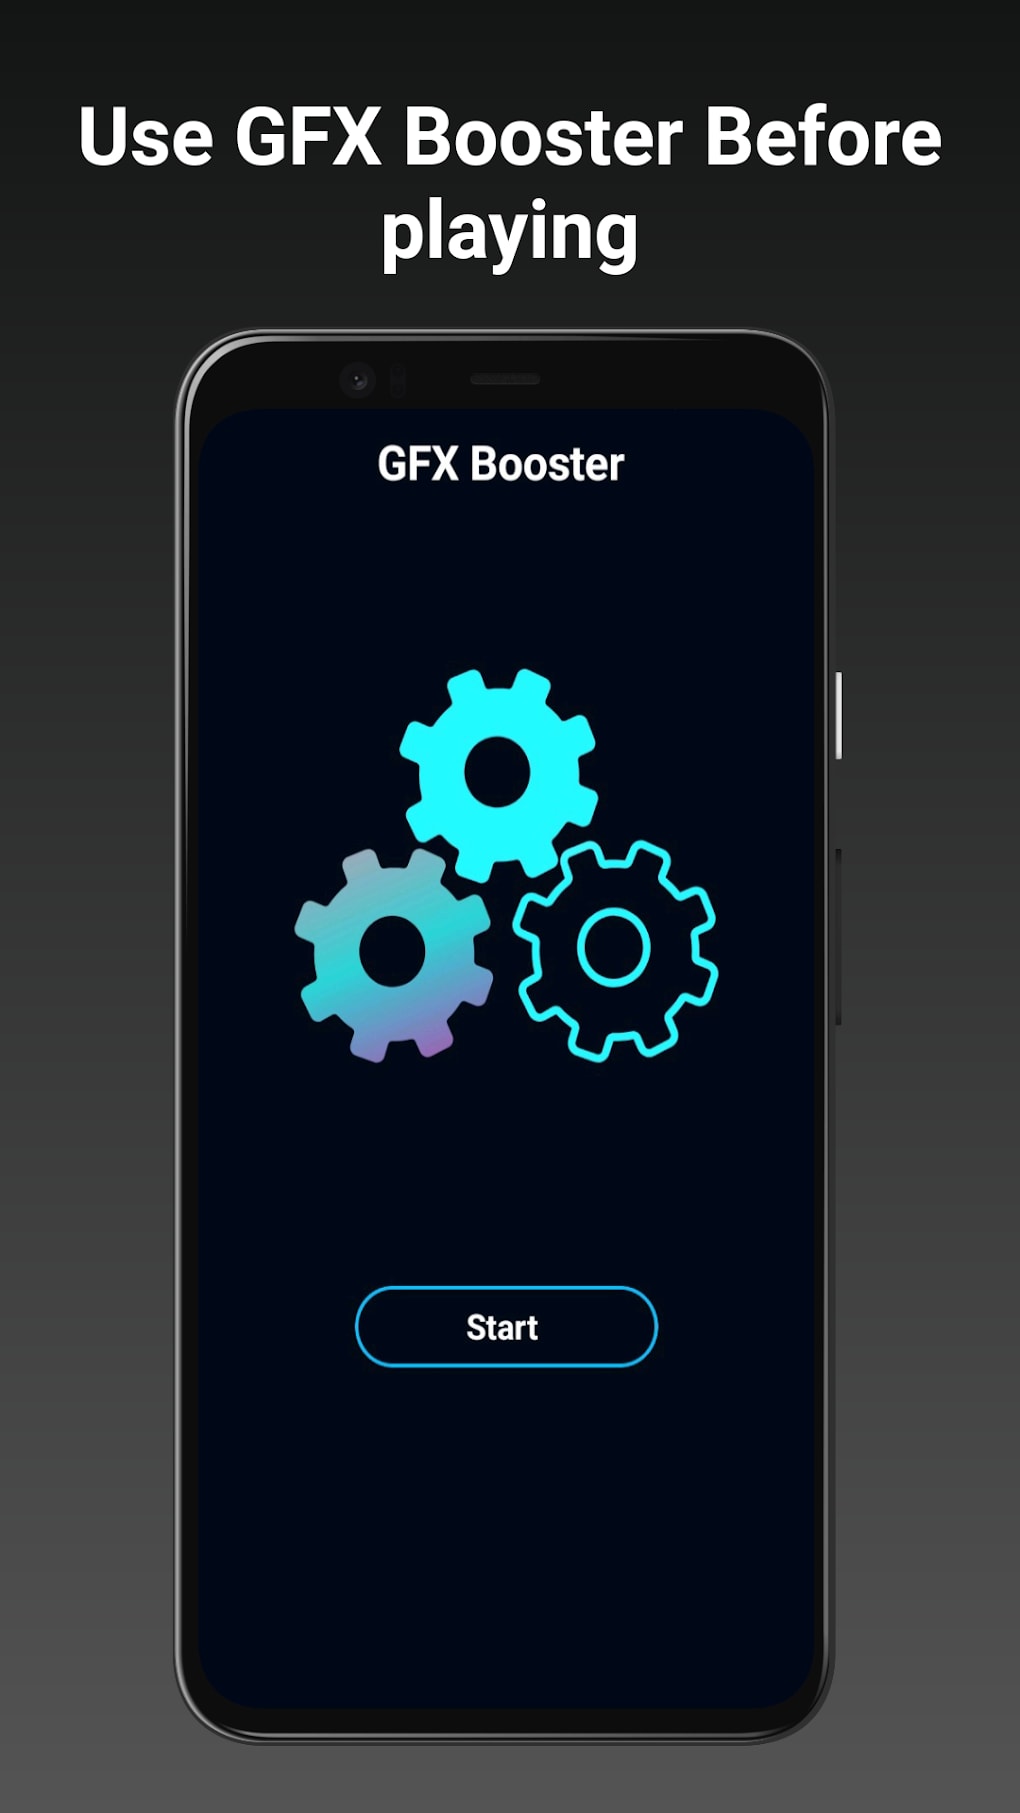 GFX Tool for Roblox - Apps on Google Play